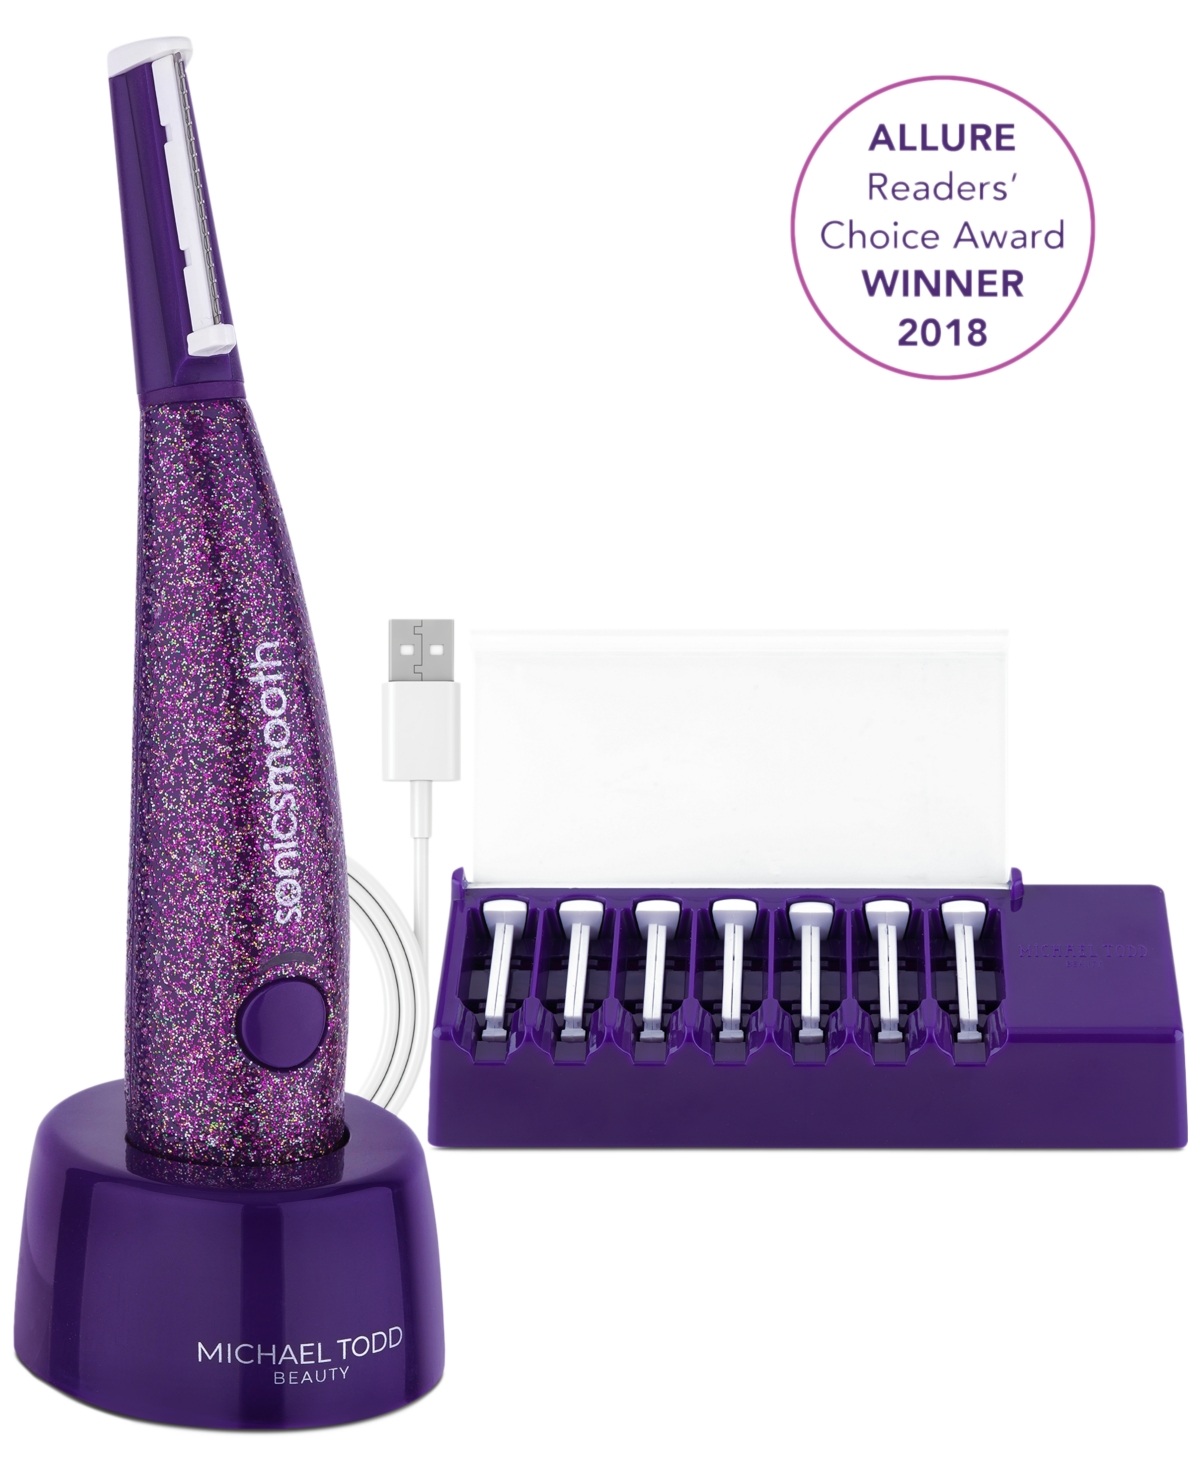 Michael Todd Beauty Limited Edition 6-Pc. Sonicsmooth Sonic Dermaplaning Set, Macy's Exclusive